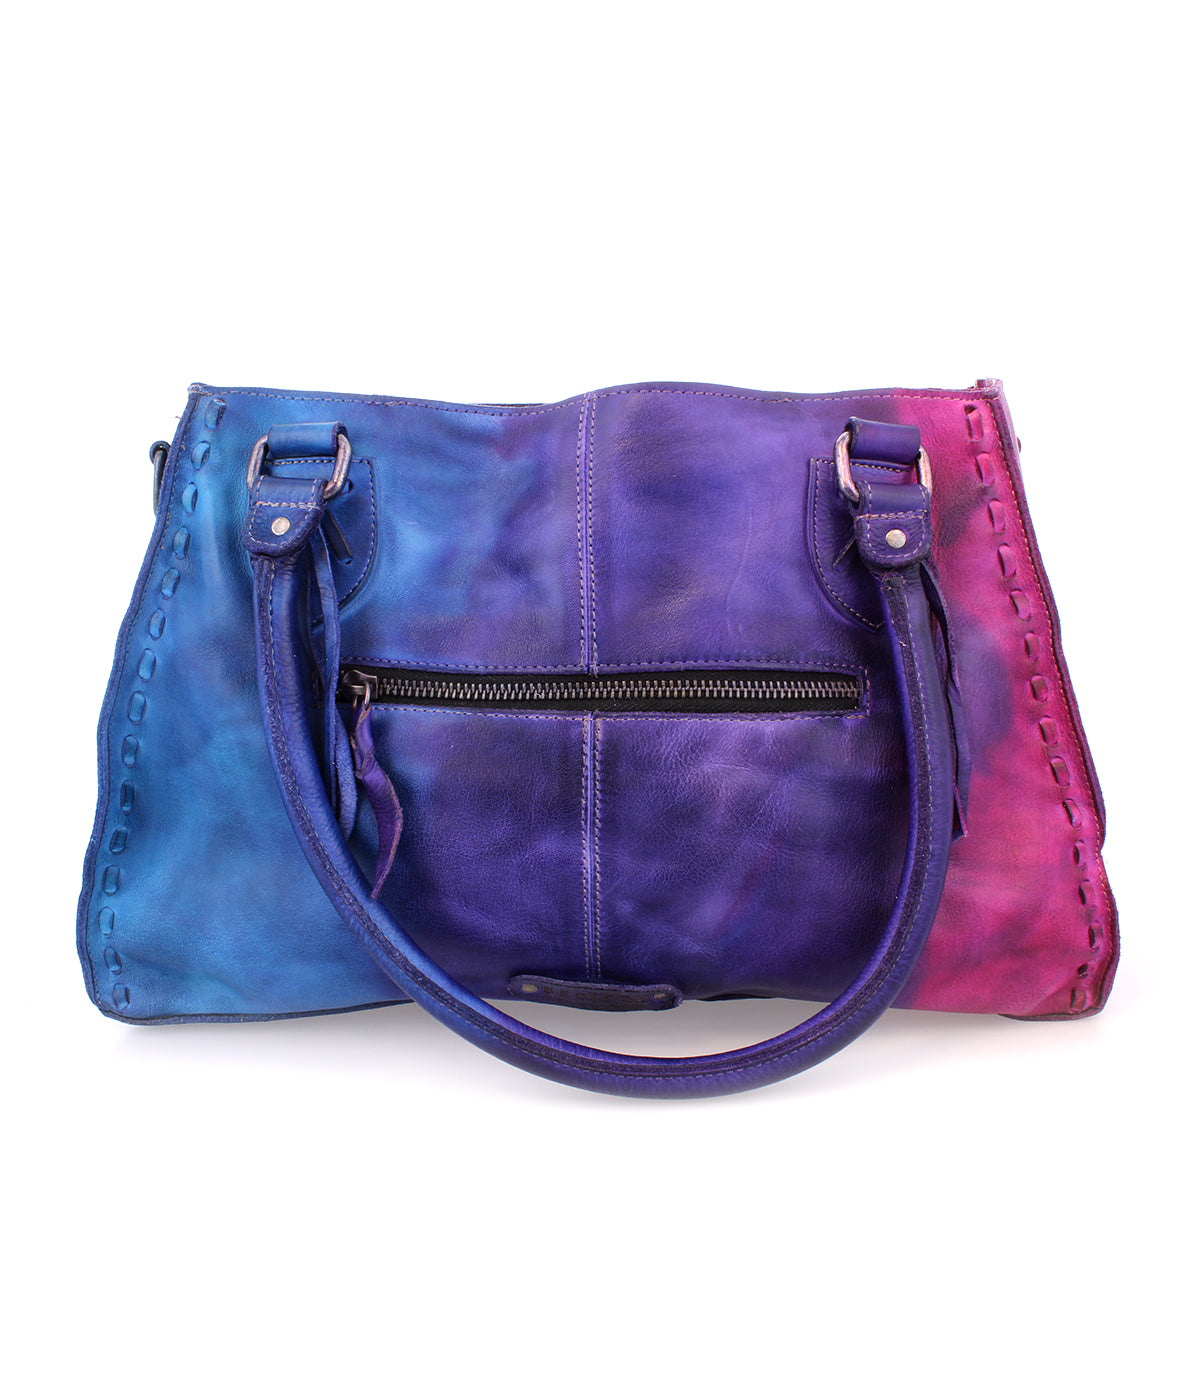 A pink, purple and blue Rockababy handbag with a zipper from Bed Stu.